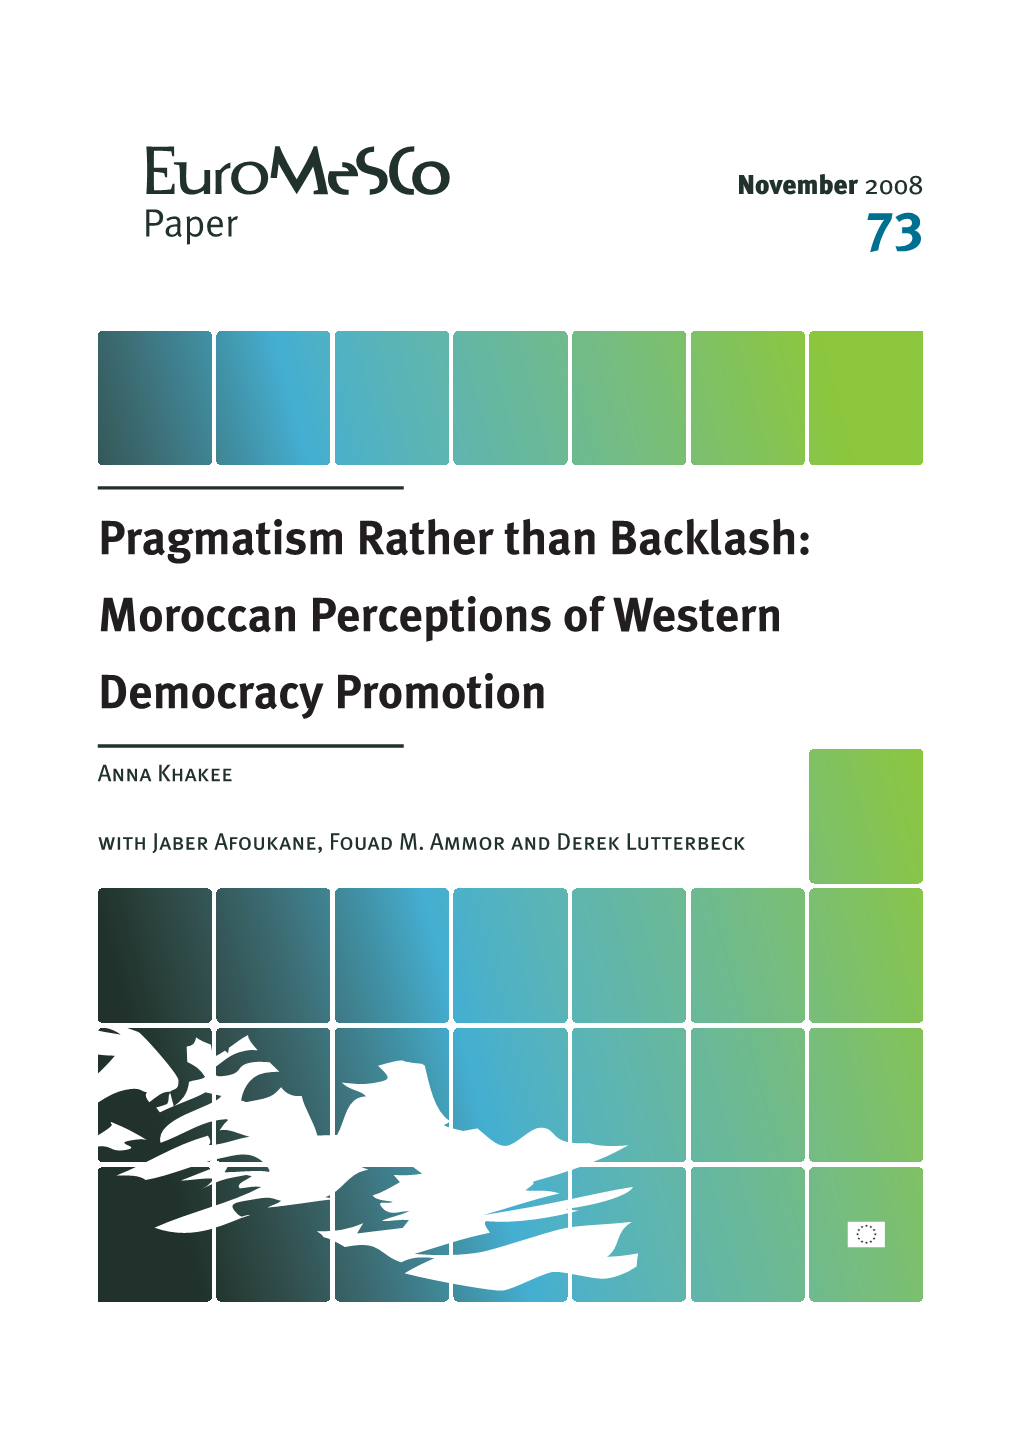 Moroccan Perceptions of Western Democracy Promotion